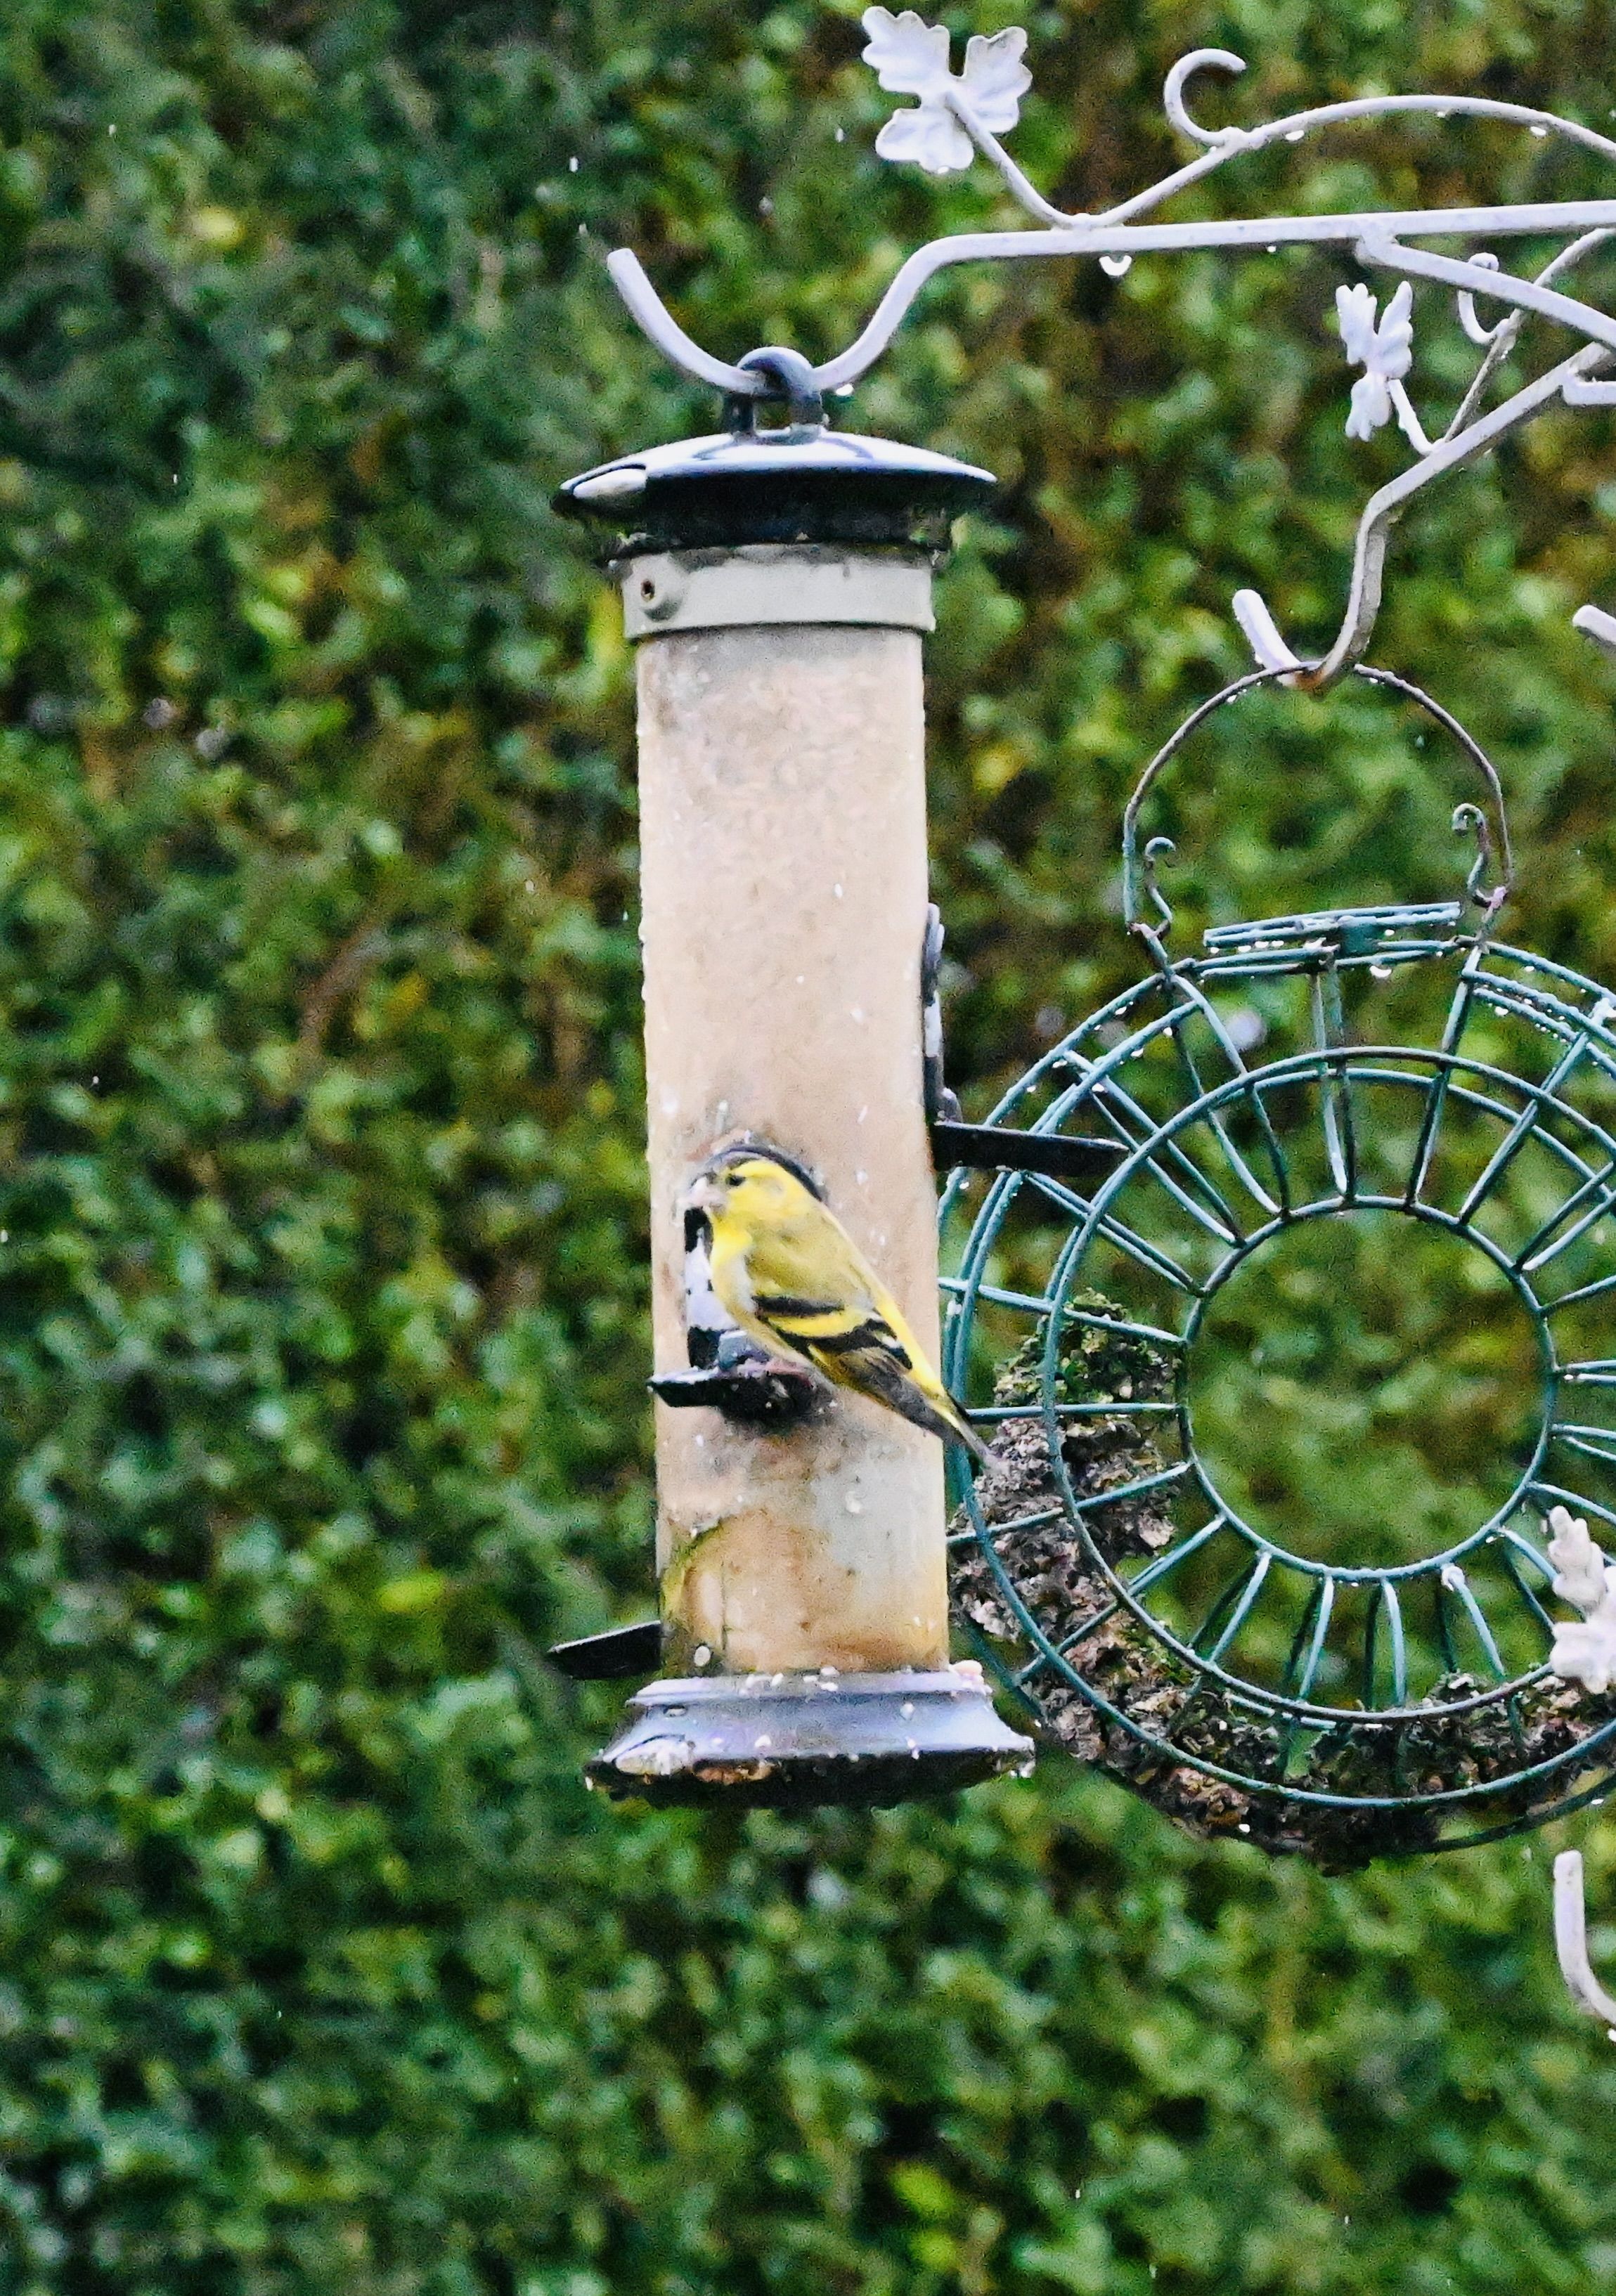 FÁILTE: The siskin is a very welcome visitor